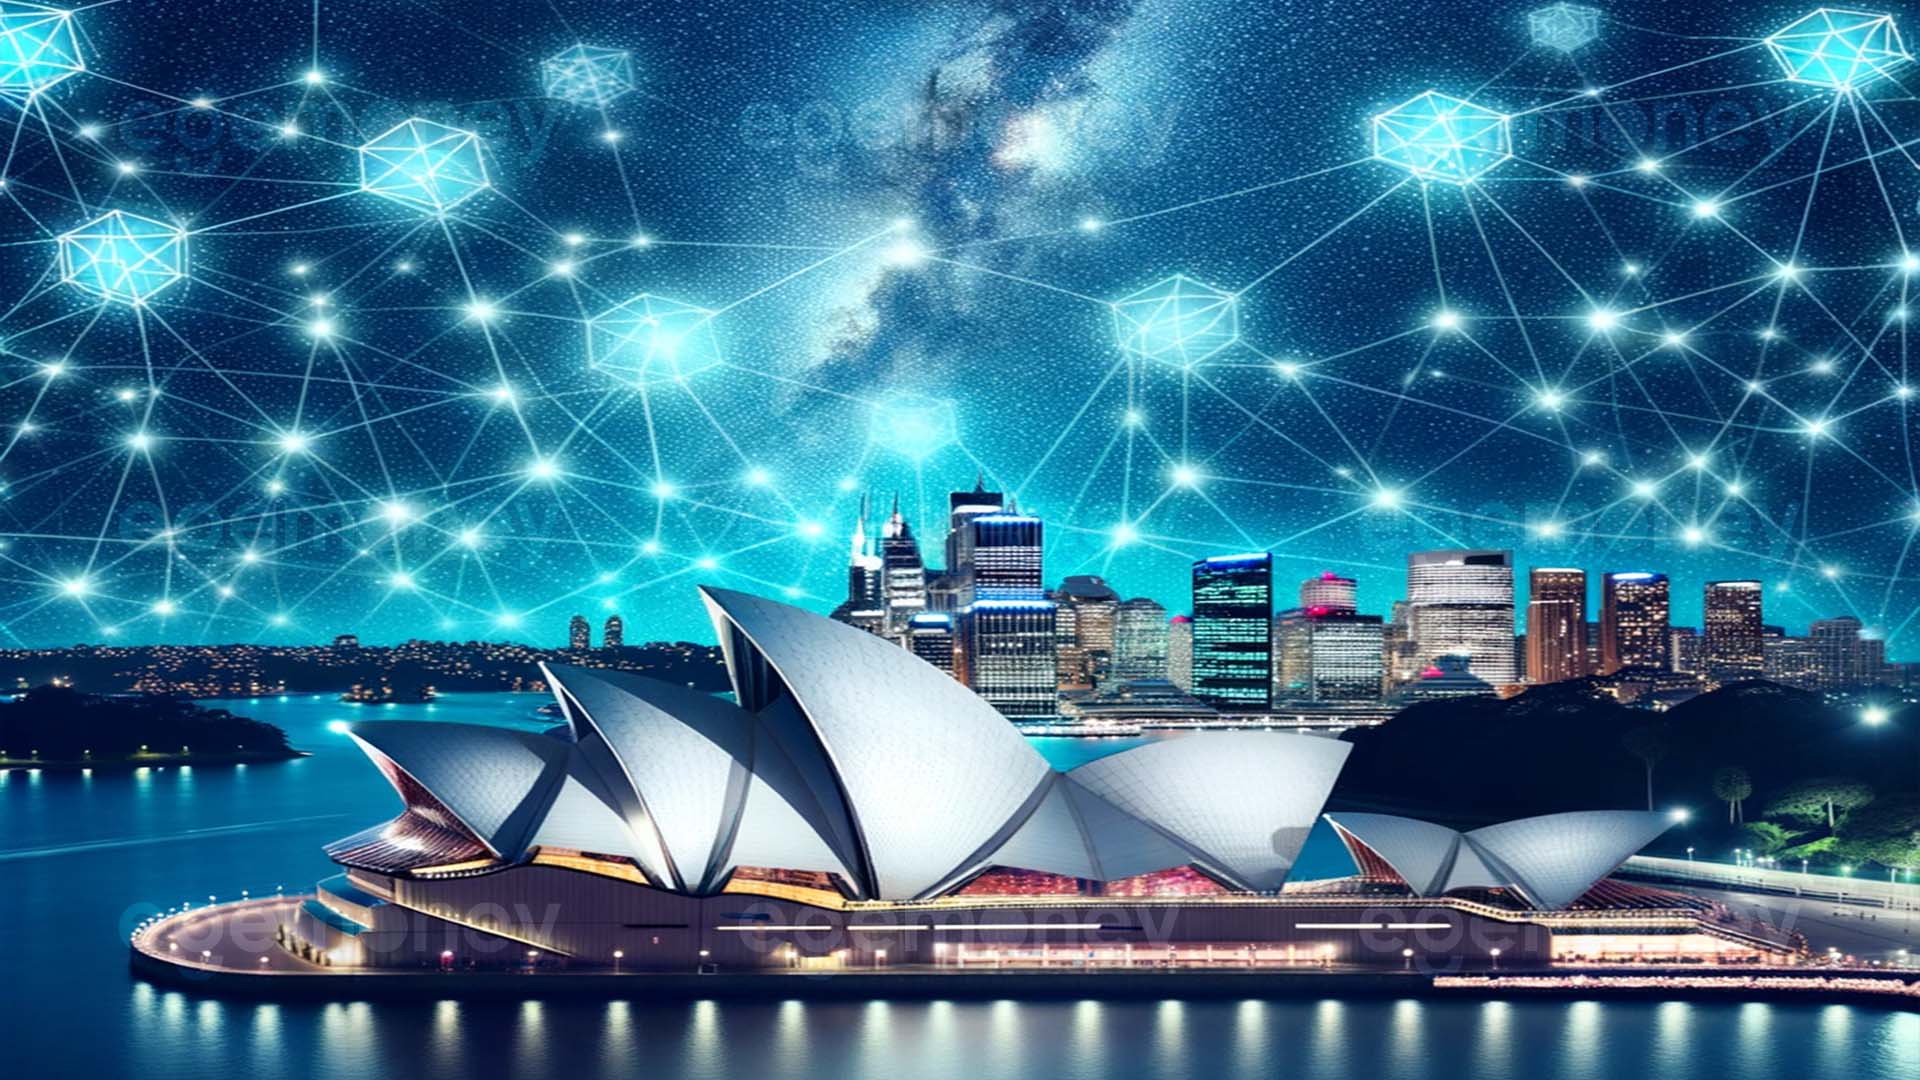 Reserve Bank of Australia: CBDCs and Tokenization Could Be the Money of the Future